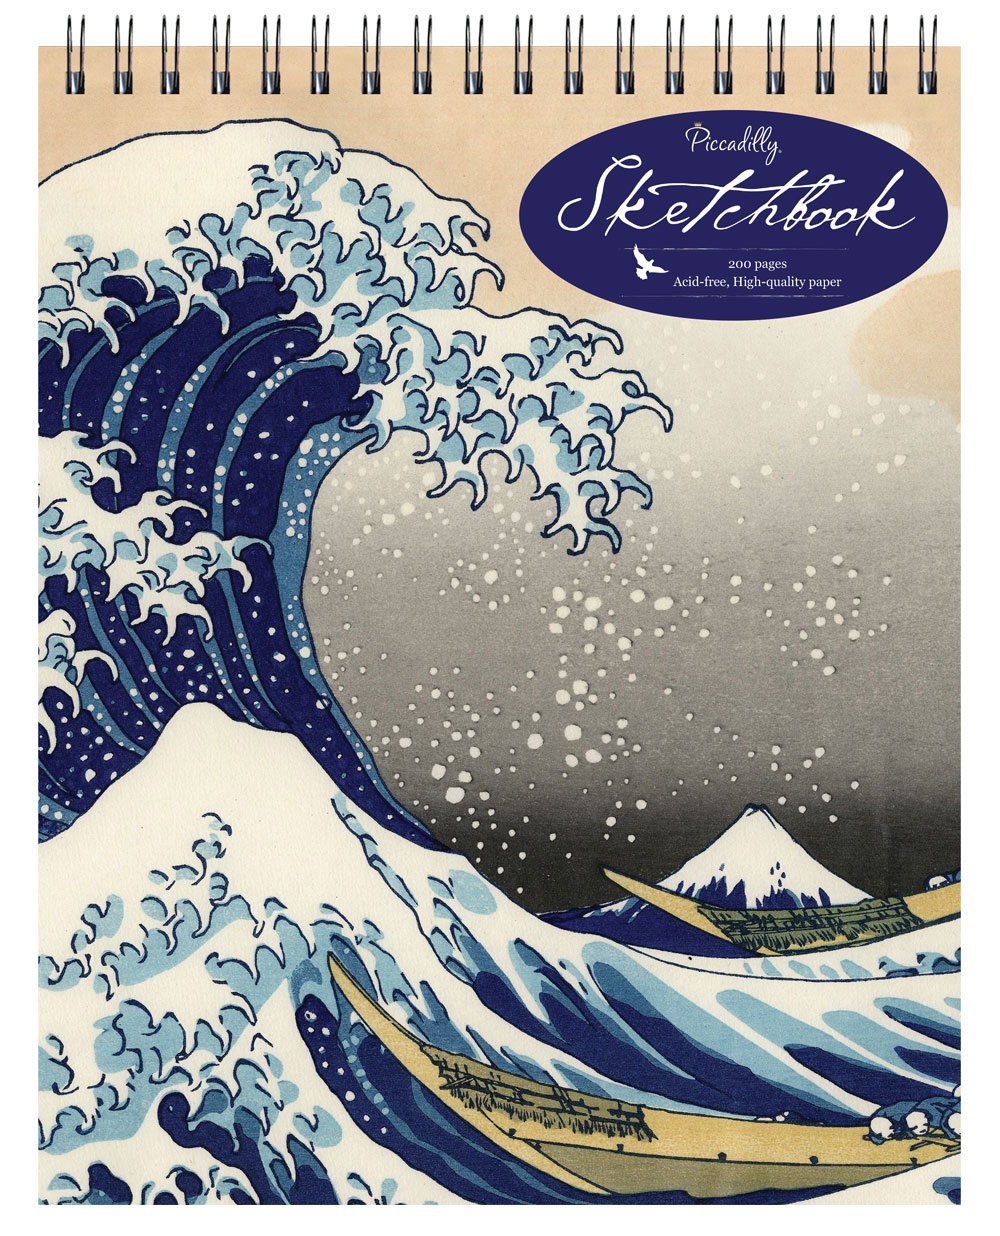 https://piccadillyinc.com/wp-content/uploads/2021/03/Hokusai-Wave-with-Sticker.jpg